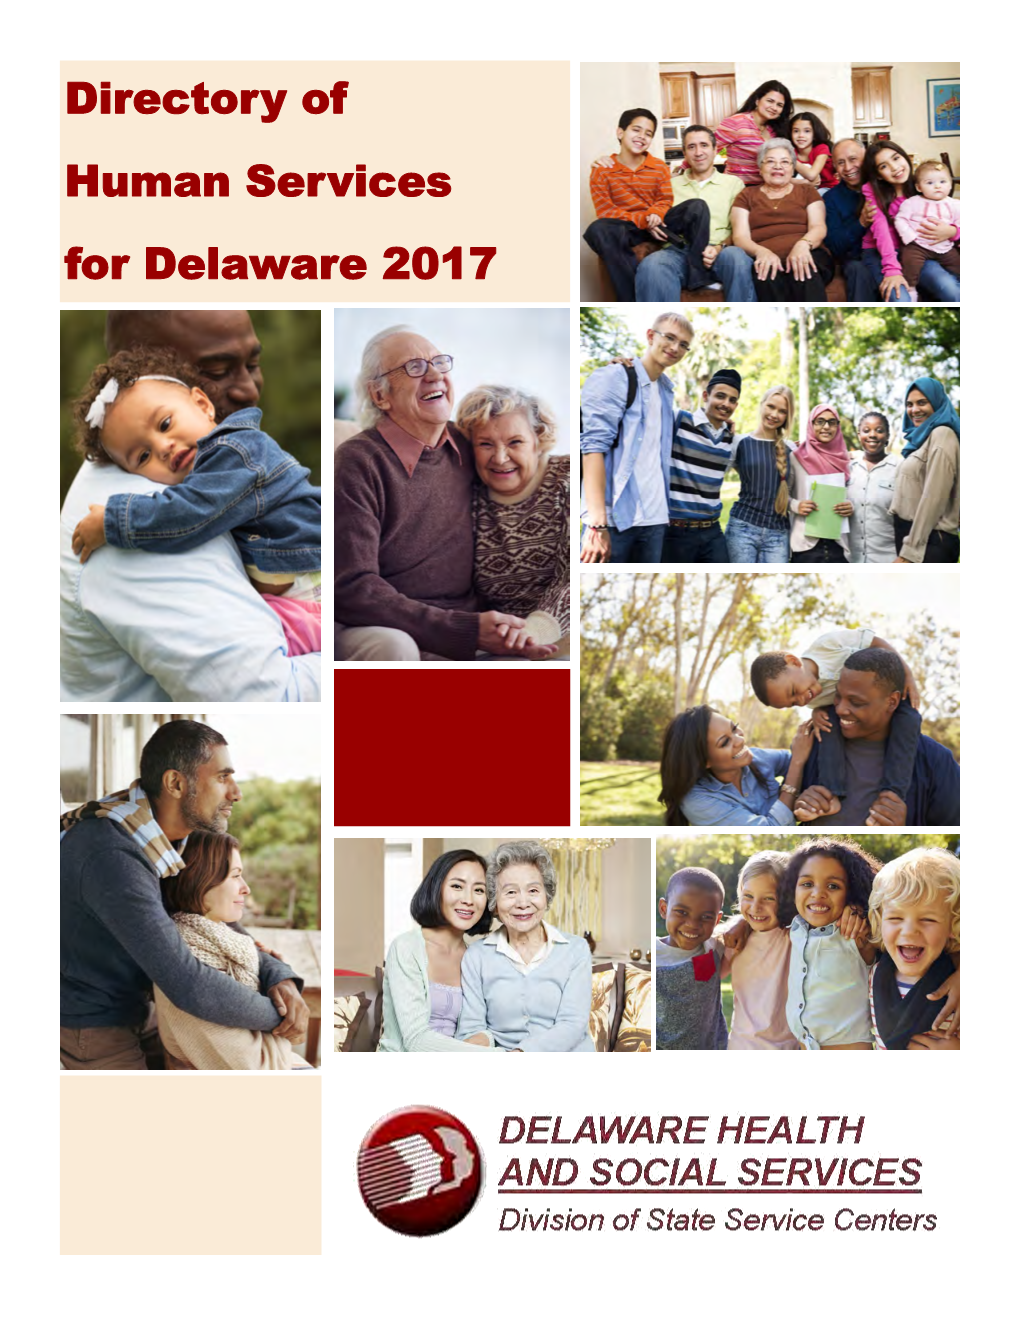 A Feature of the 2017 Directory of Human Services for Delaware